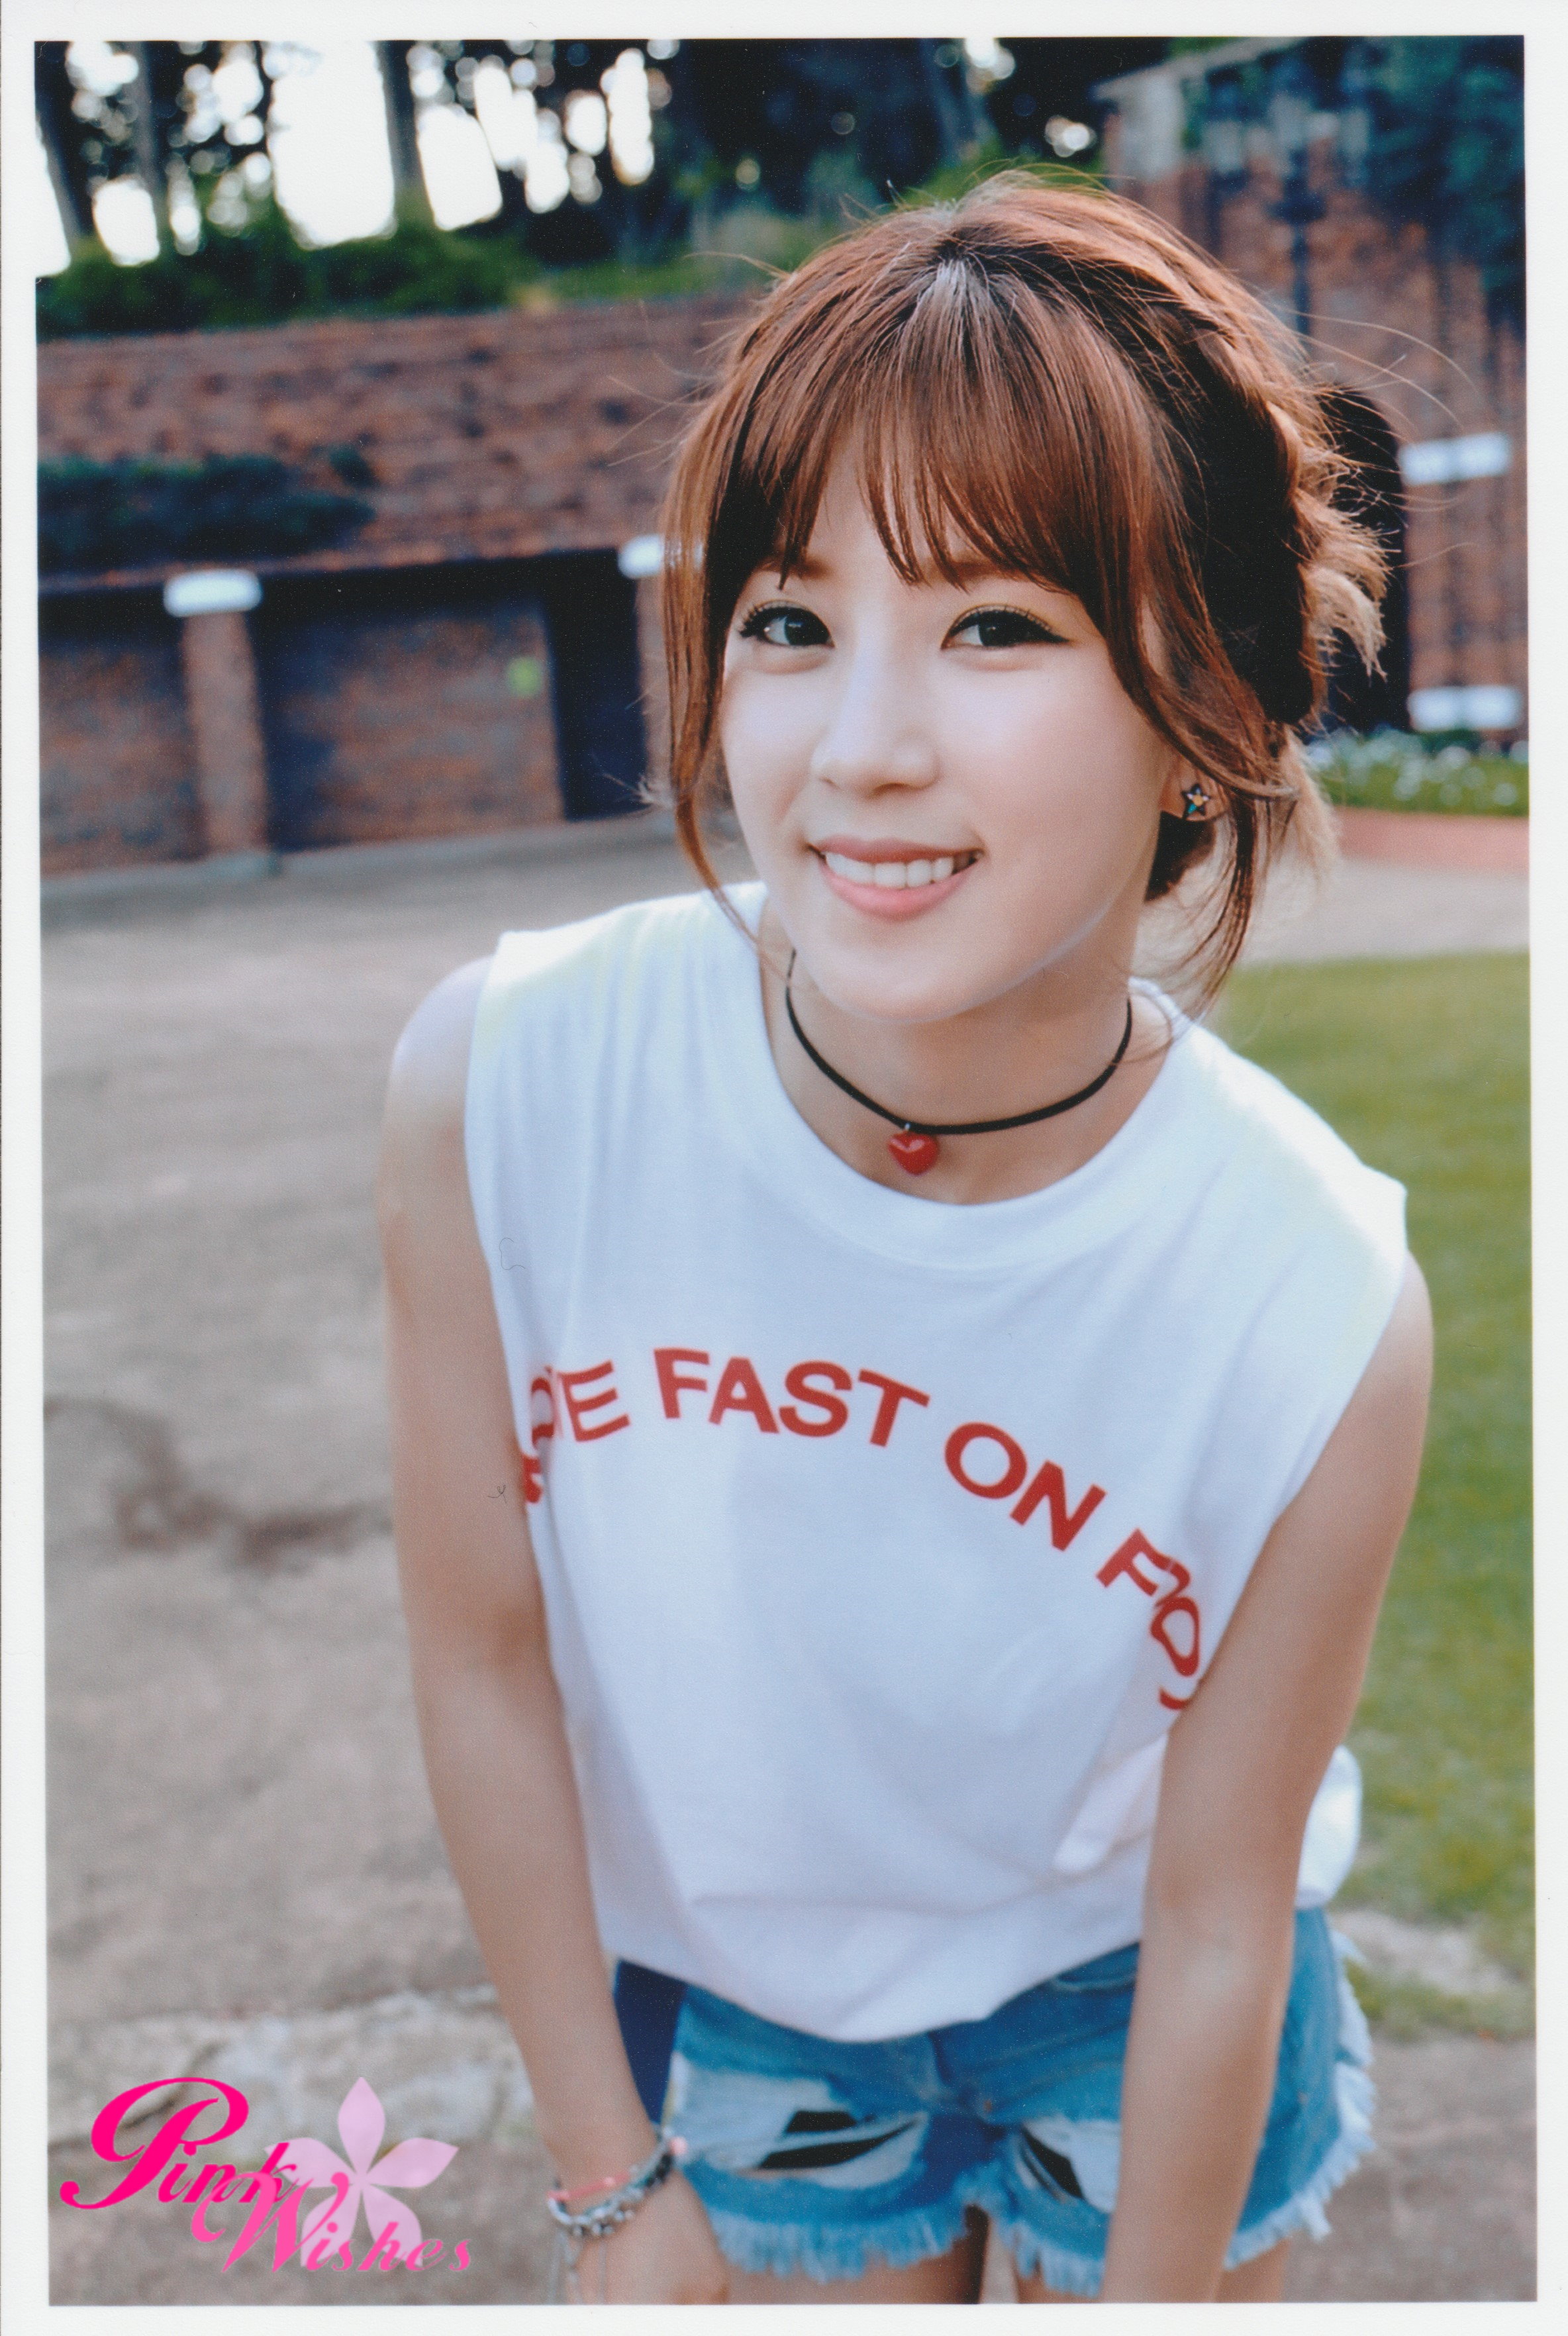 Park Cho Rong Android iPhone Wallpaper Asiachan Kpop